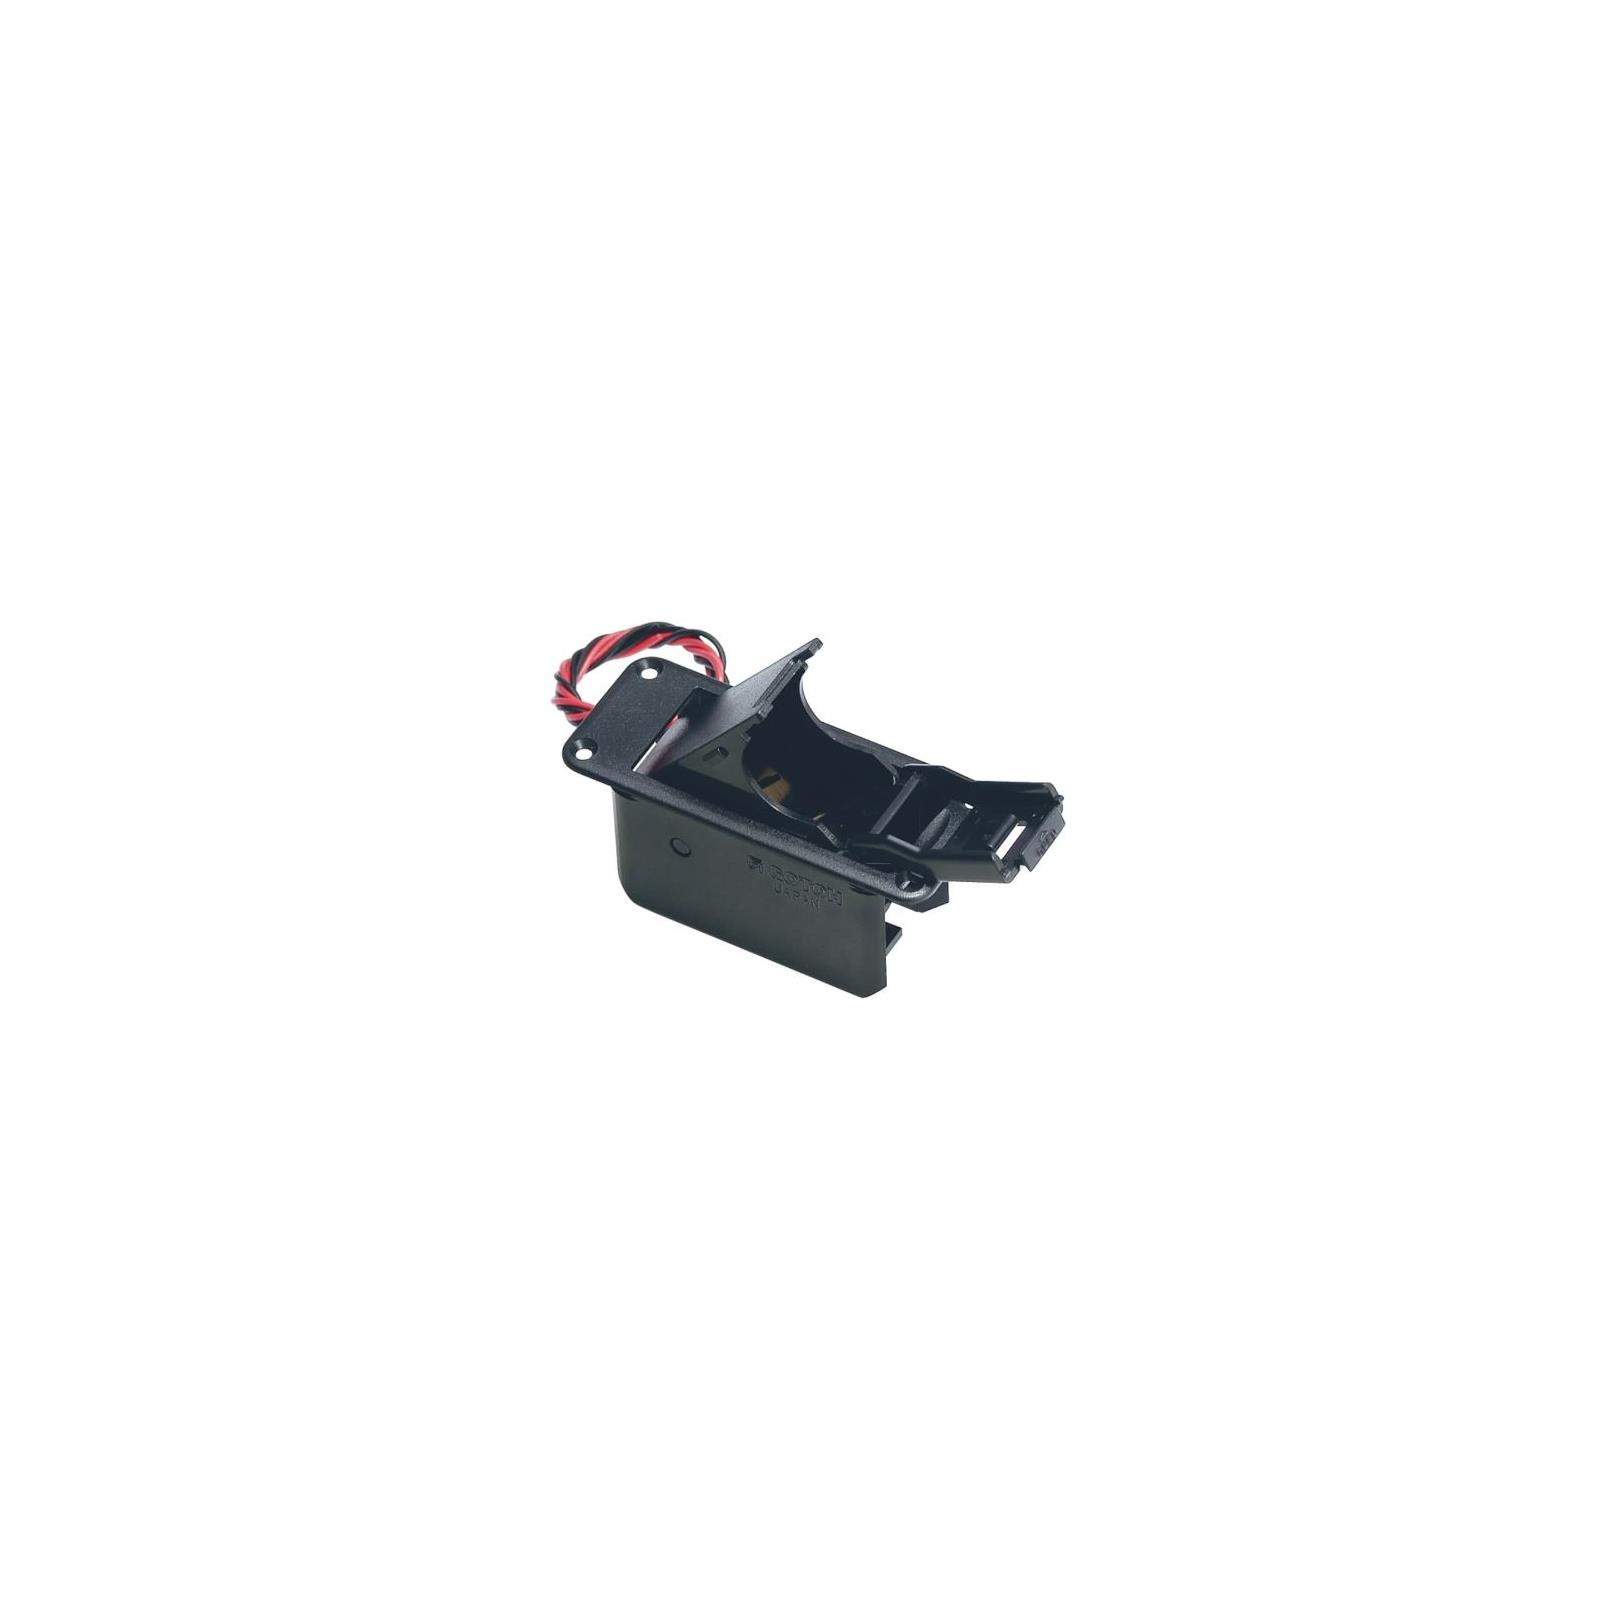 All Parts Top Mount Battery Compartment